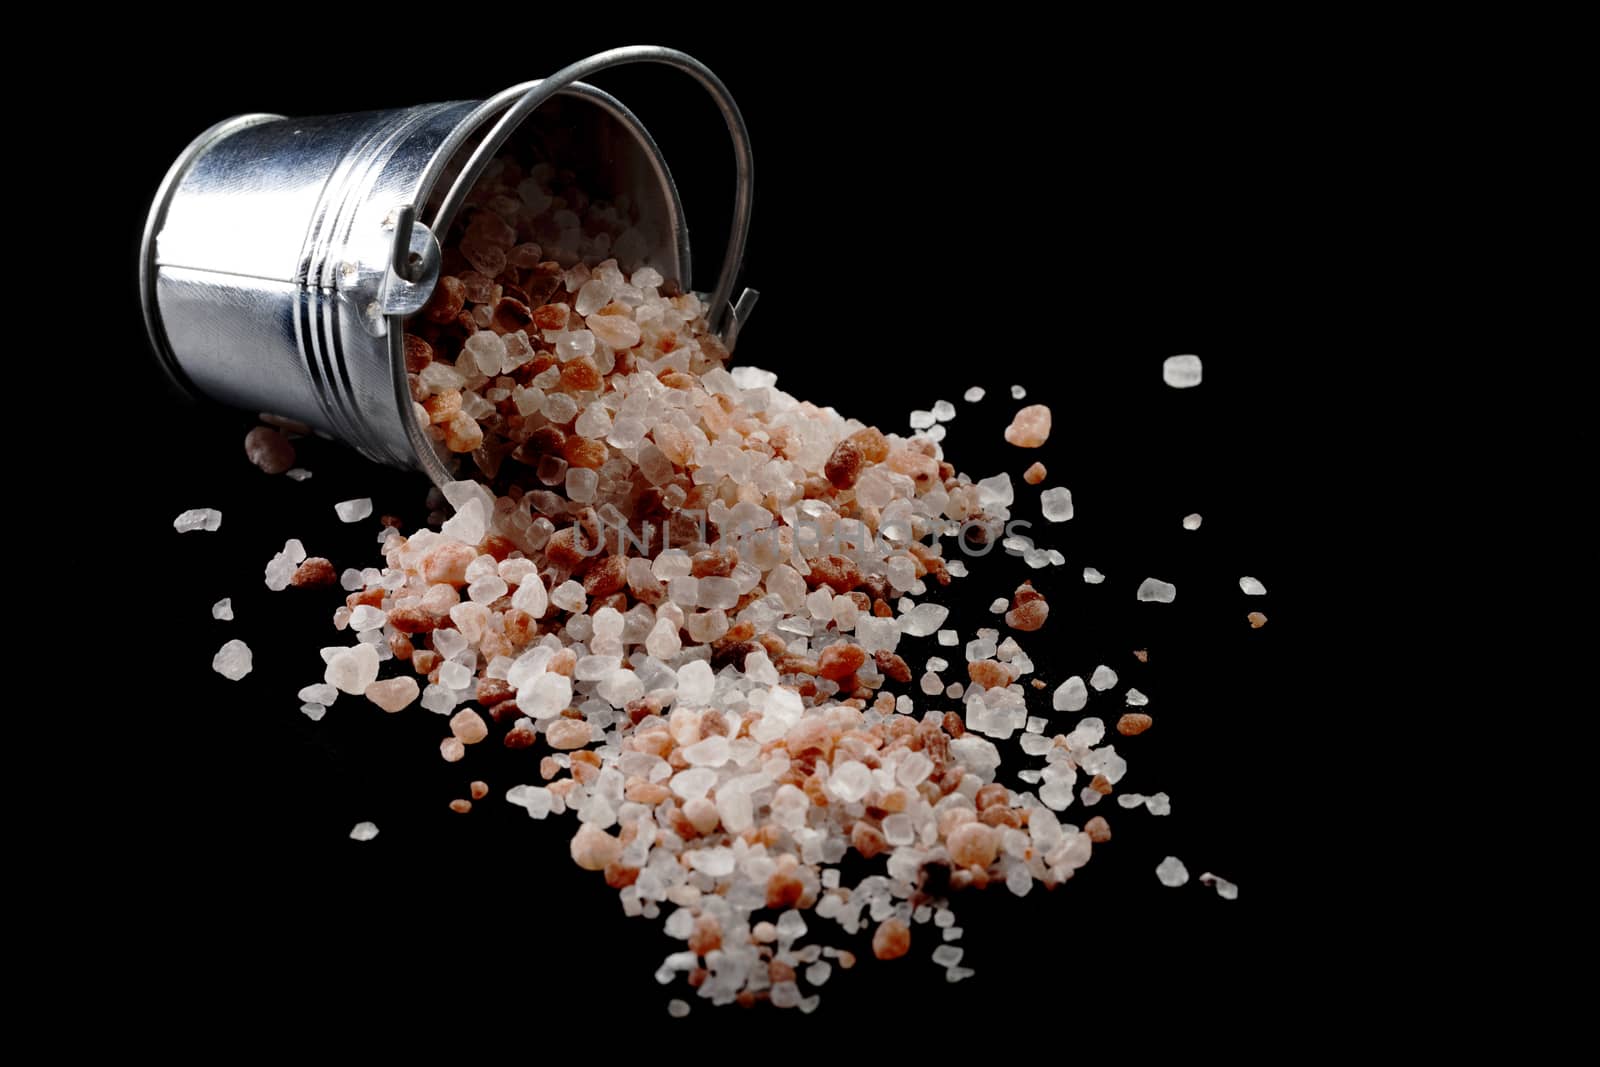 Spilled Himalayan Salt From Silver Metal Bucket on Black Background